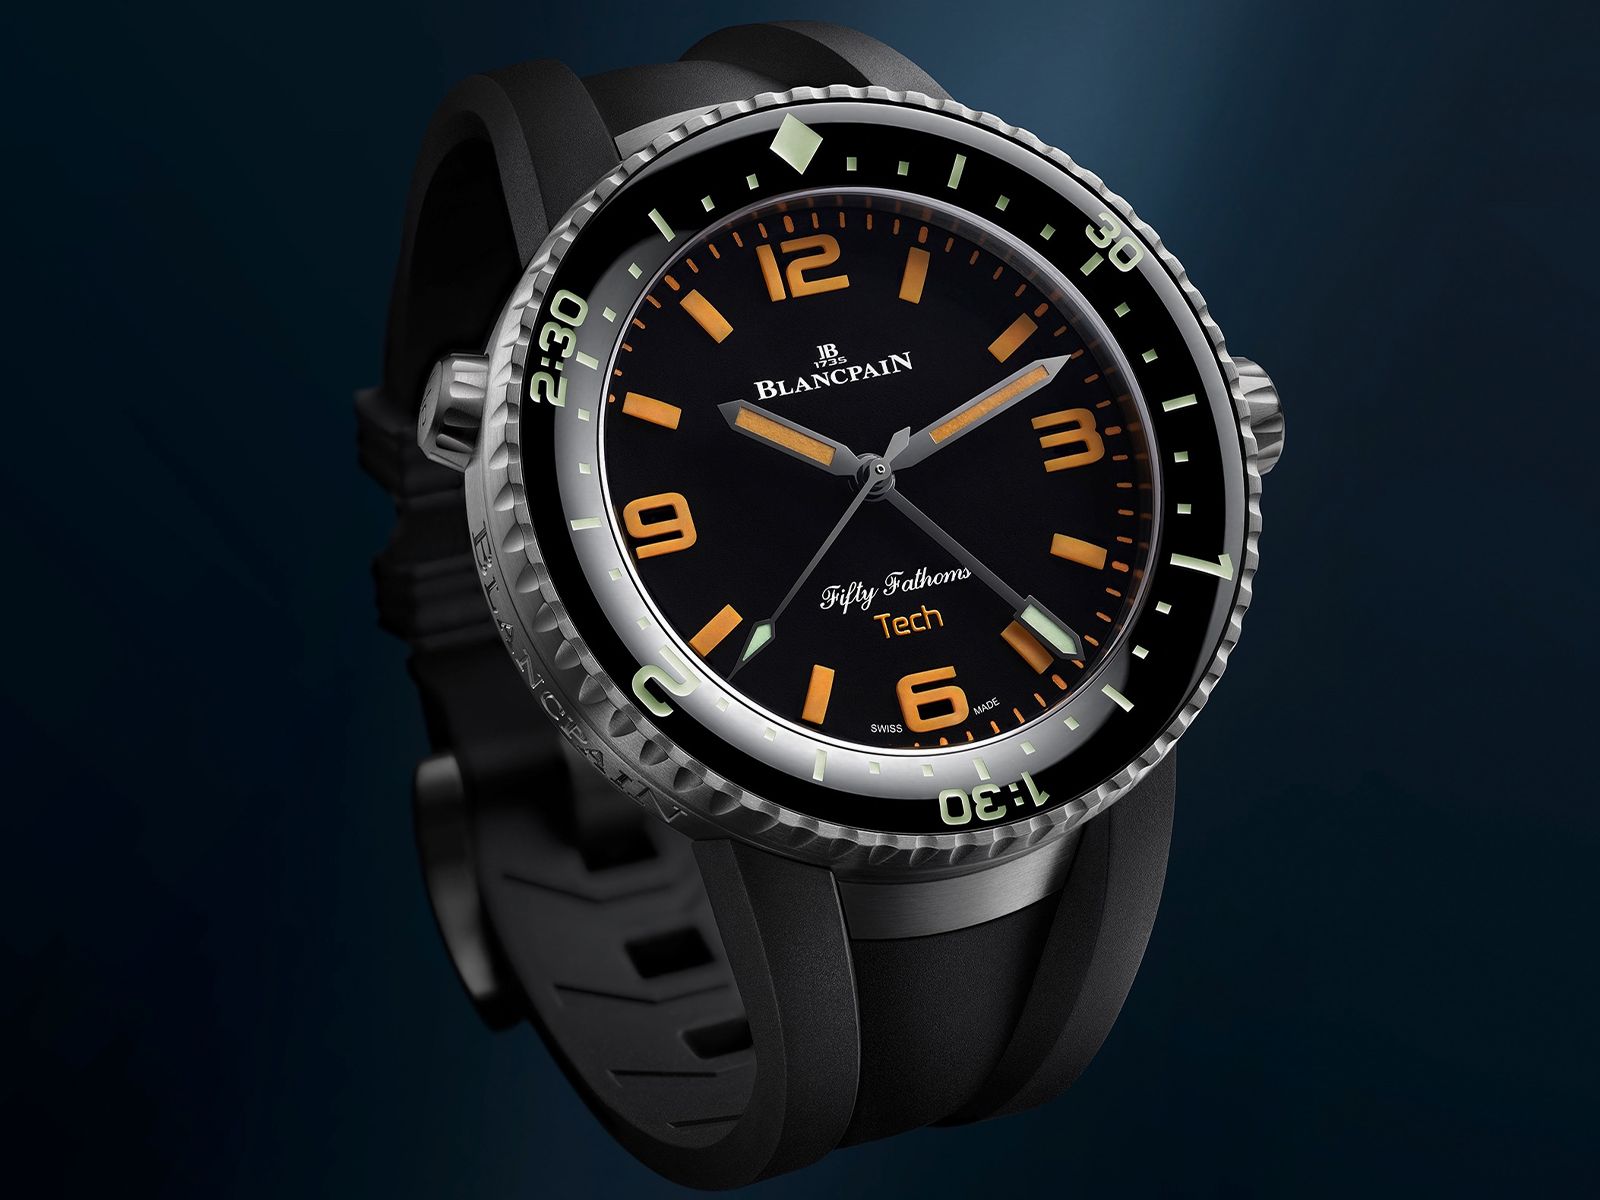 Blancpain celebrates the 70th anniversary of the Fifty Fathoms with a new model: The Tech Gombessa